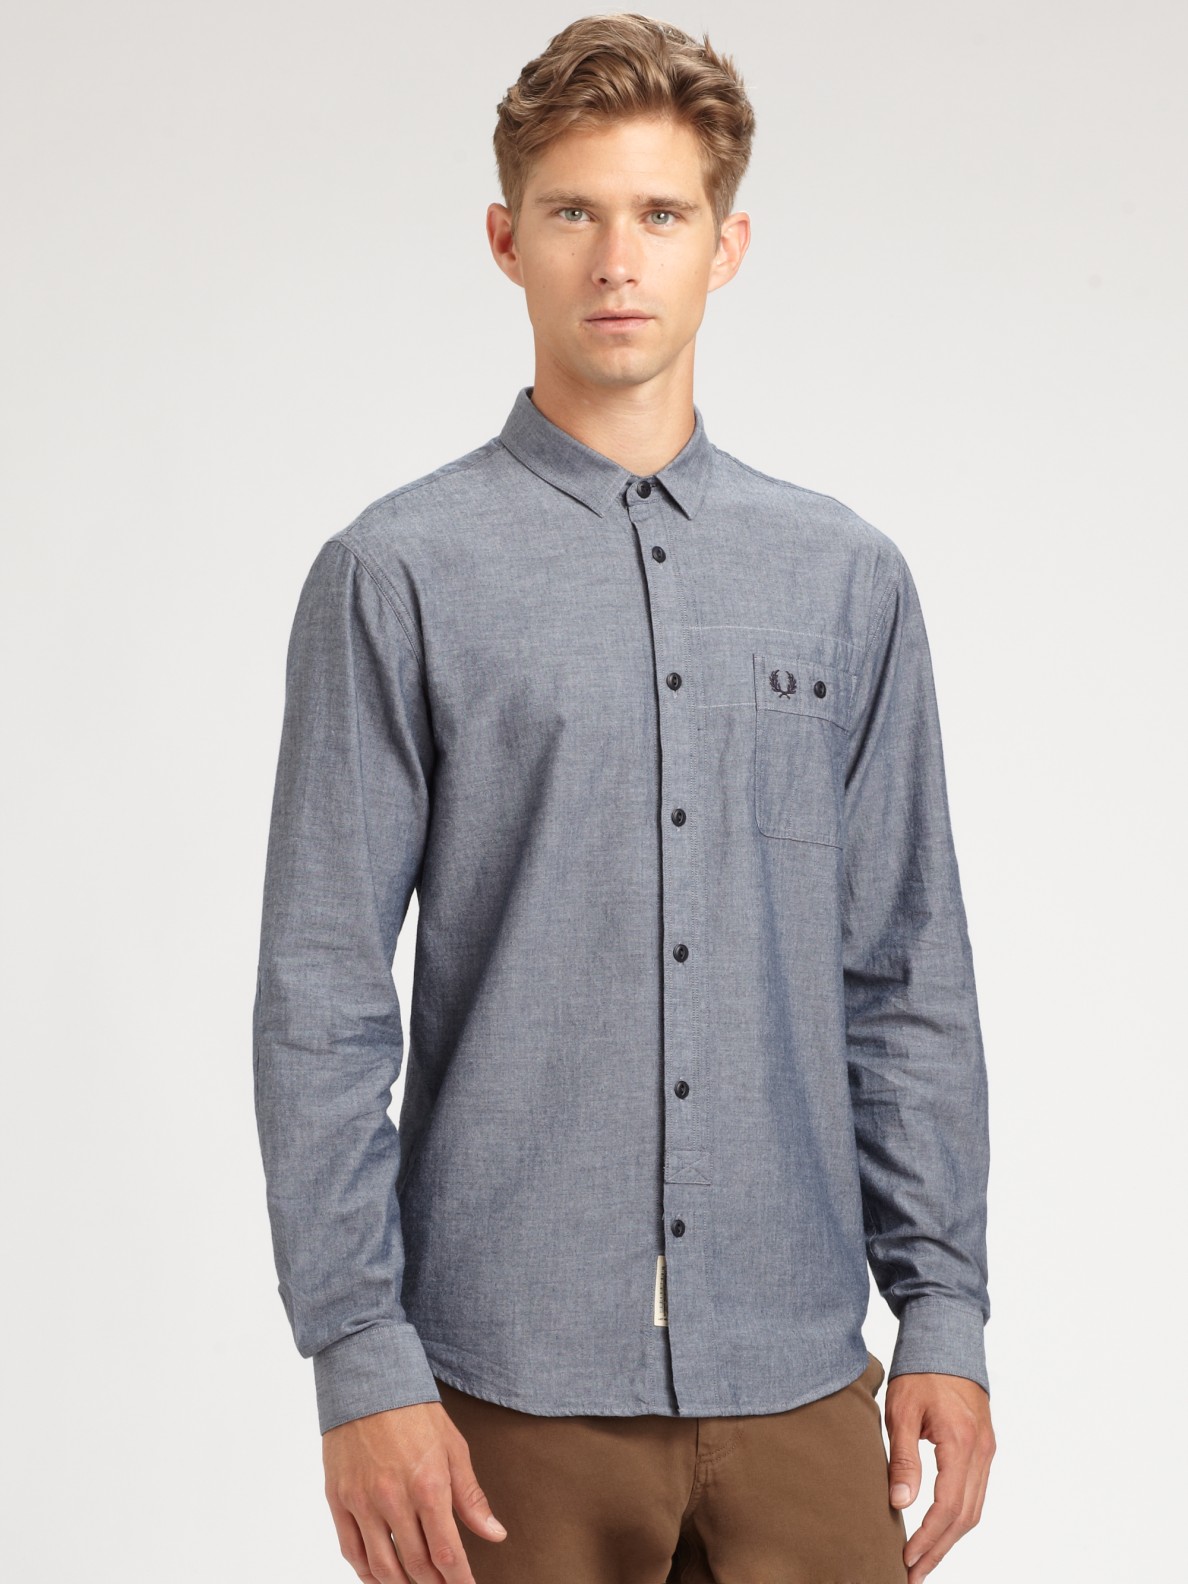 Lyst - Fred Perry Chambray Work Shirt in Blue for Men